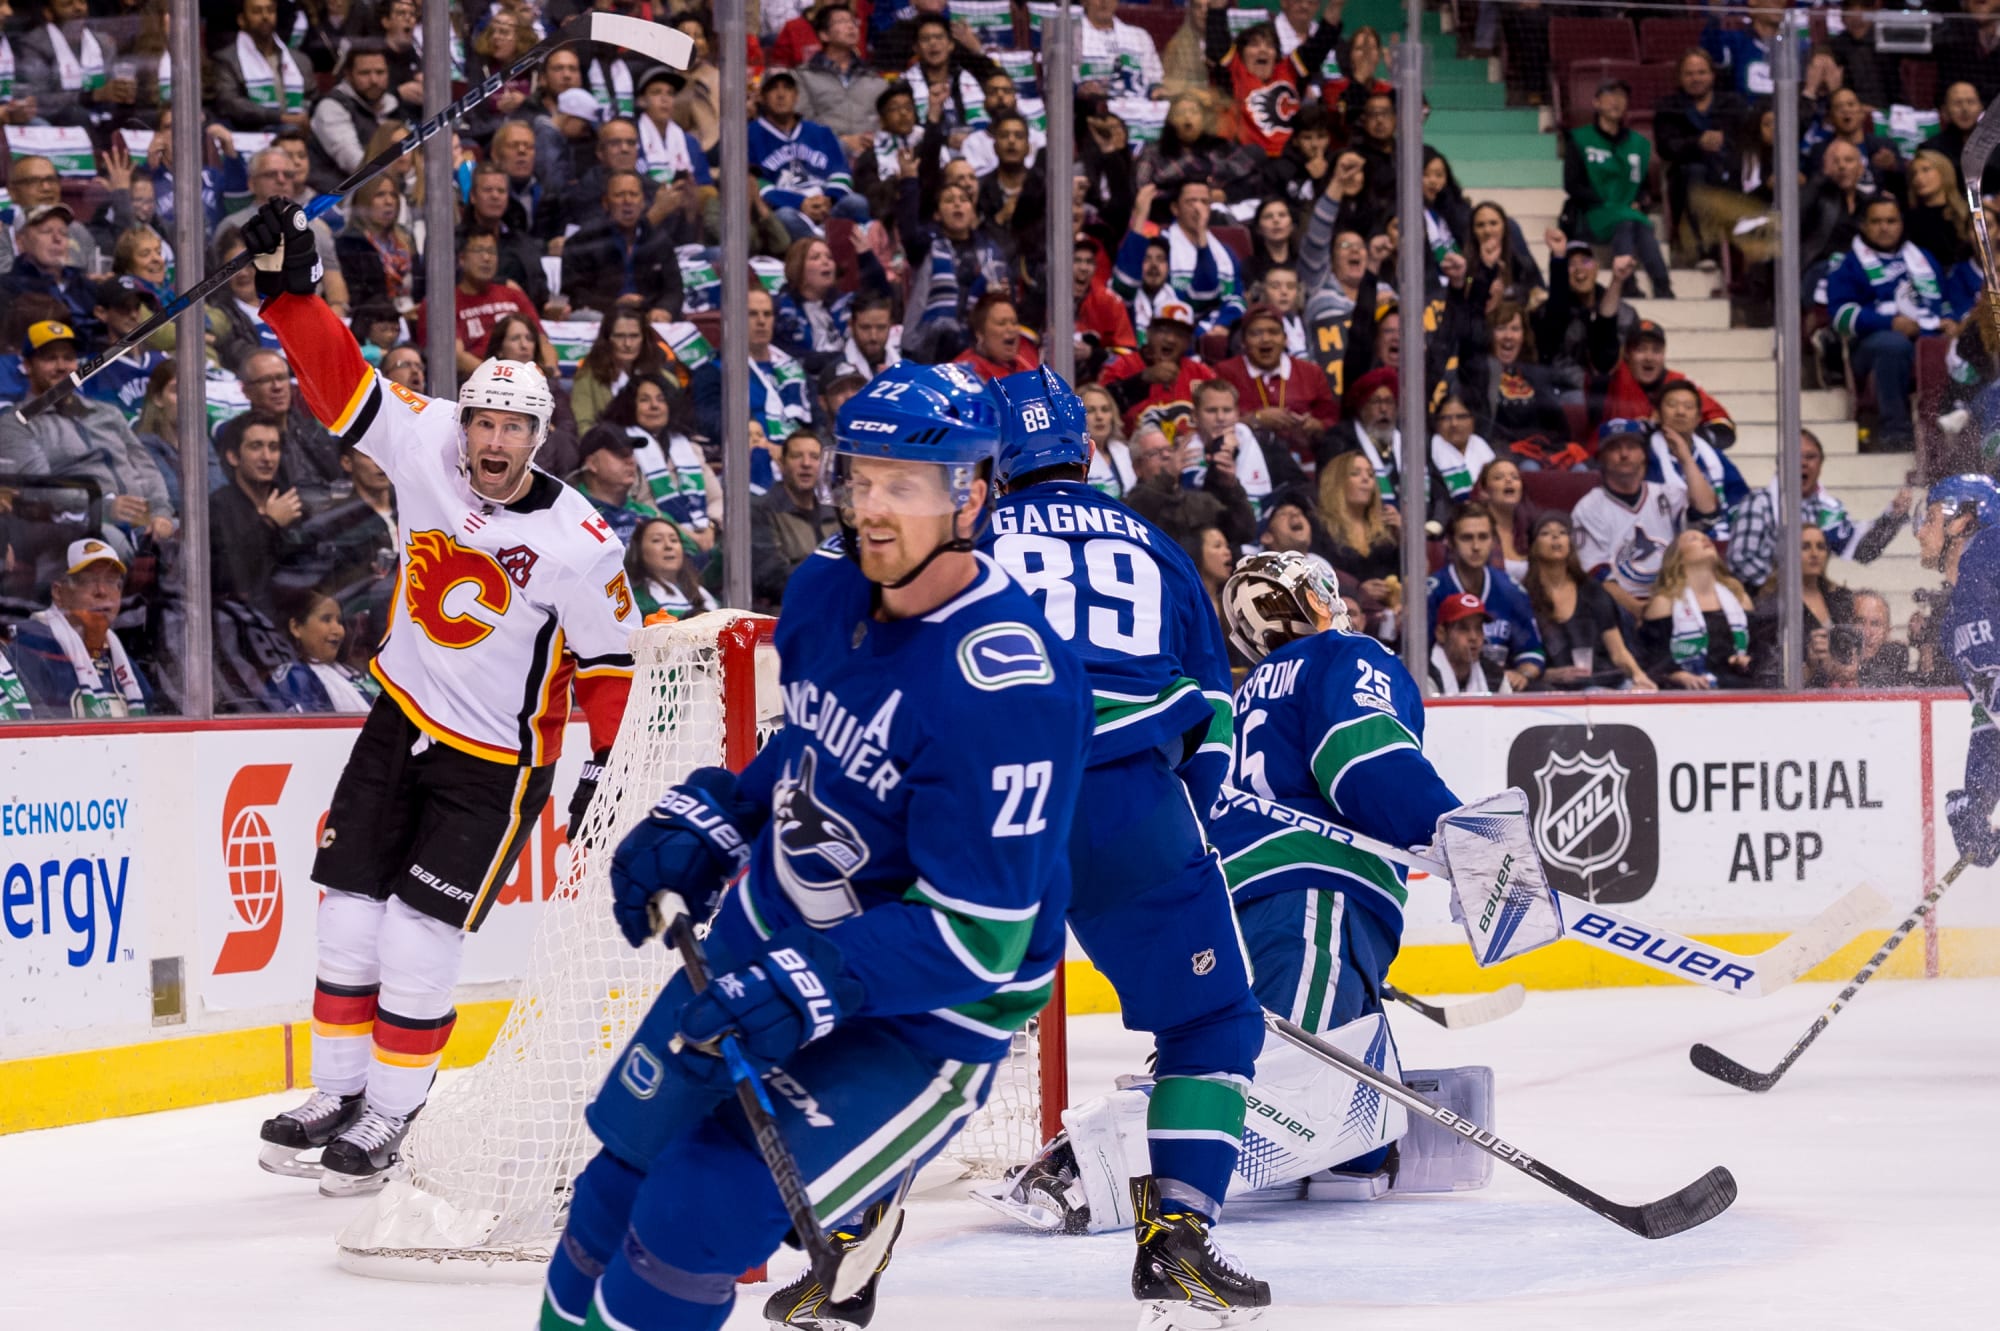 Vancouver Canucks move down in NHL power rankings